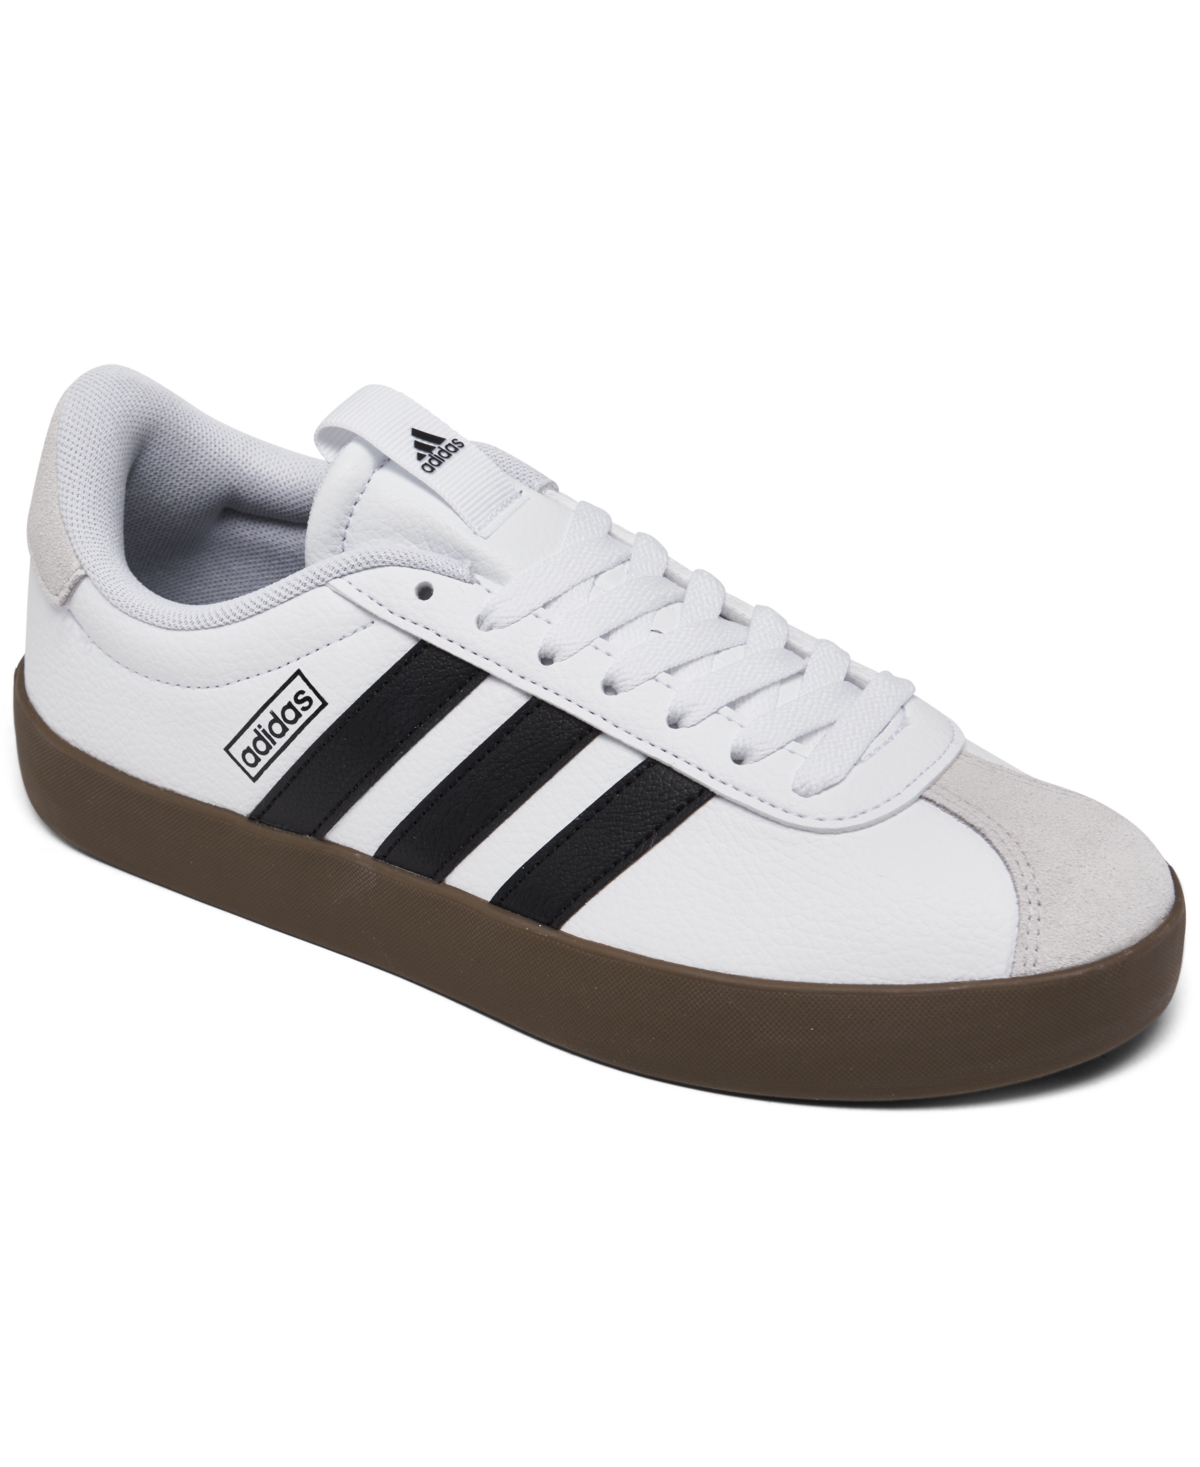 Shop Adidas Originals Women's Vl Court 3.0 Casual Sneakers From Finish Line In White,core Black,gray